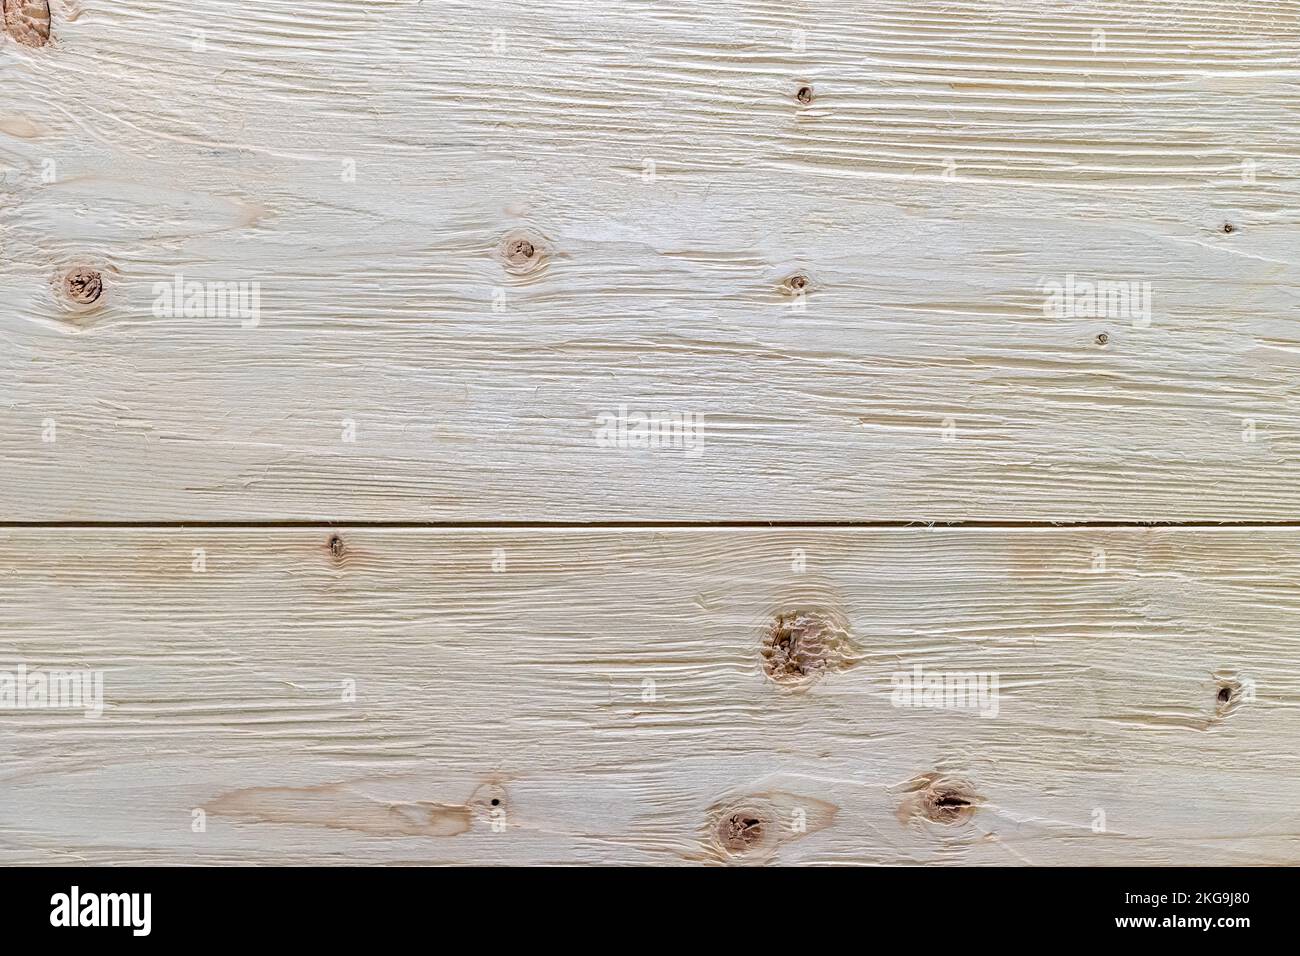 Wooden boards with fibers and knots. Wood texture. Stock Photo